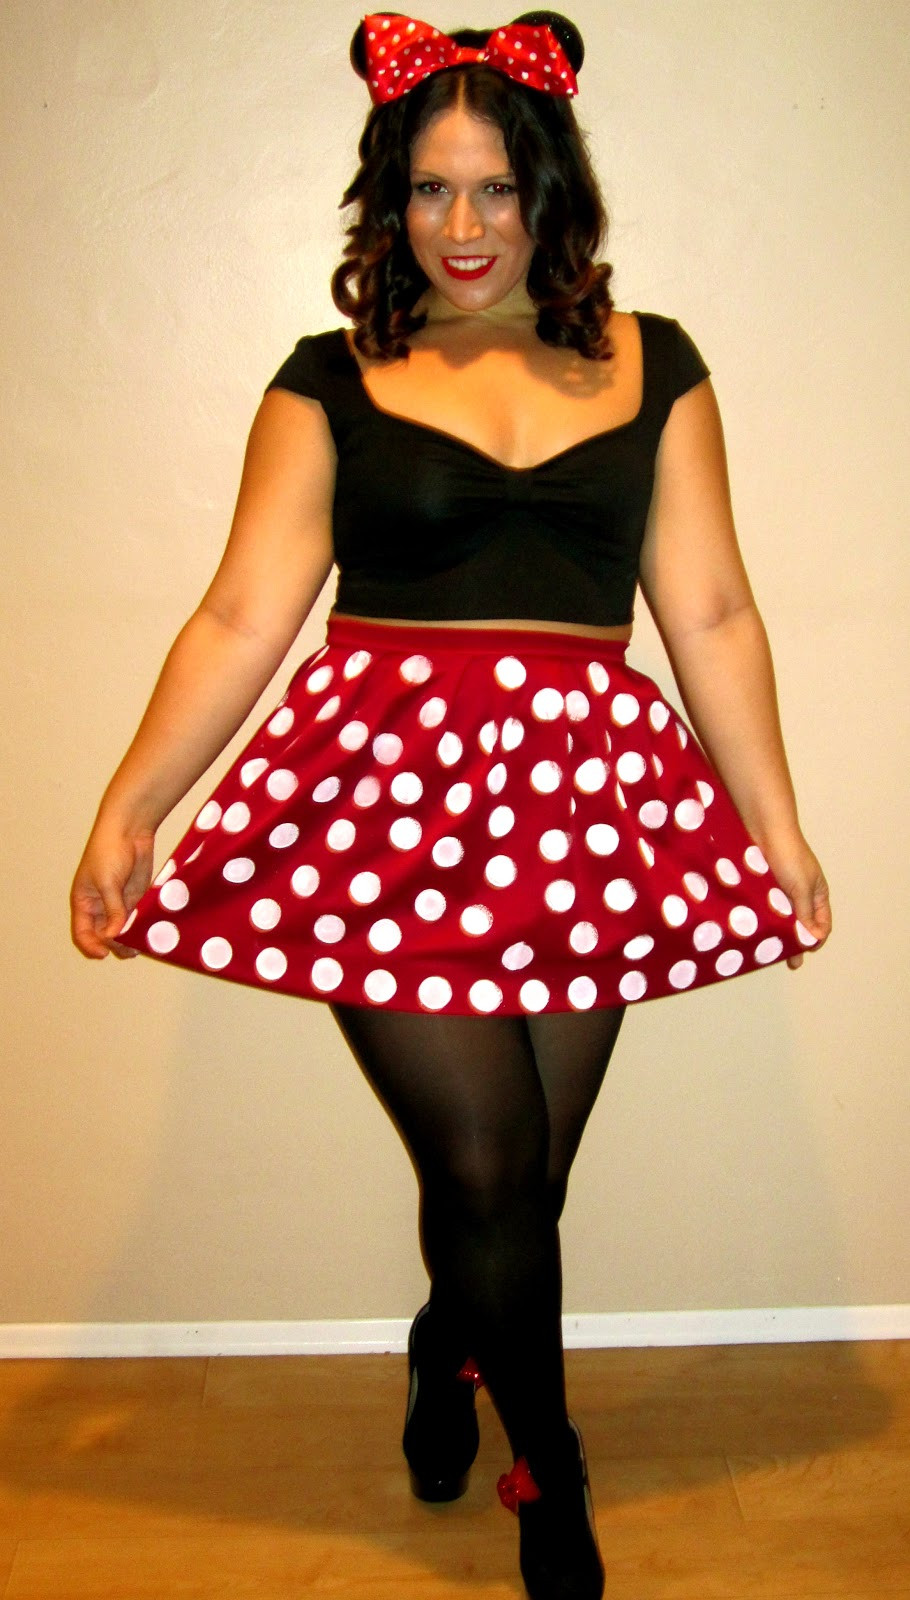 Minnie Mouse DIY Costume
 So Happy I Could DIY